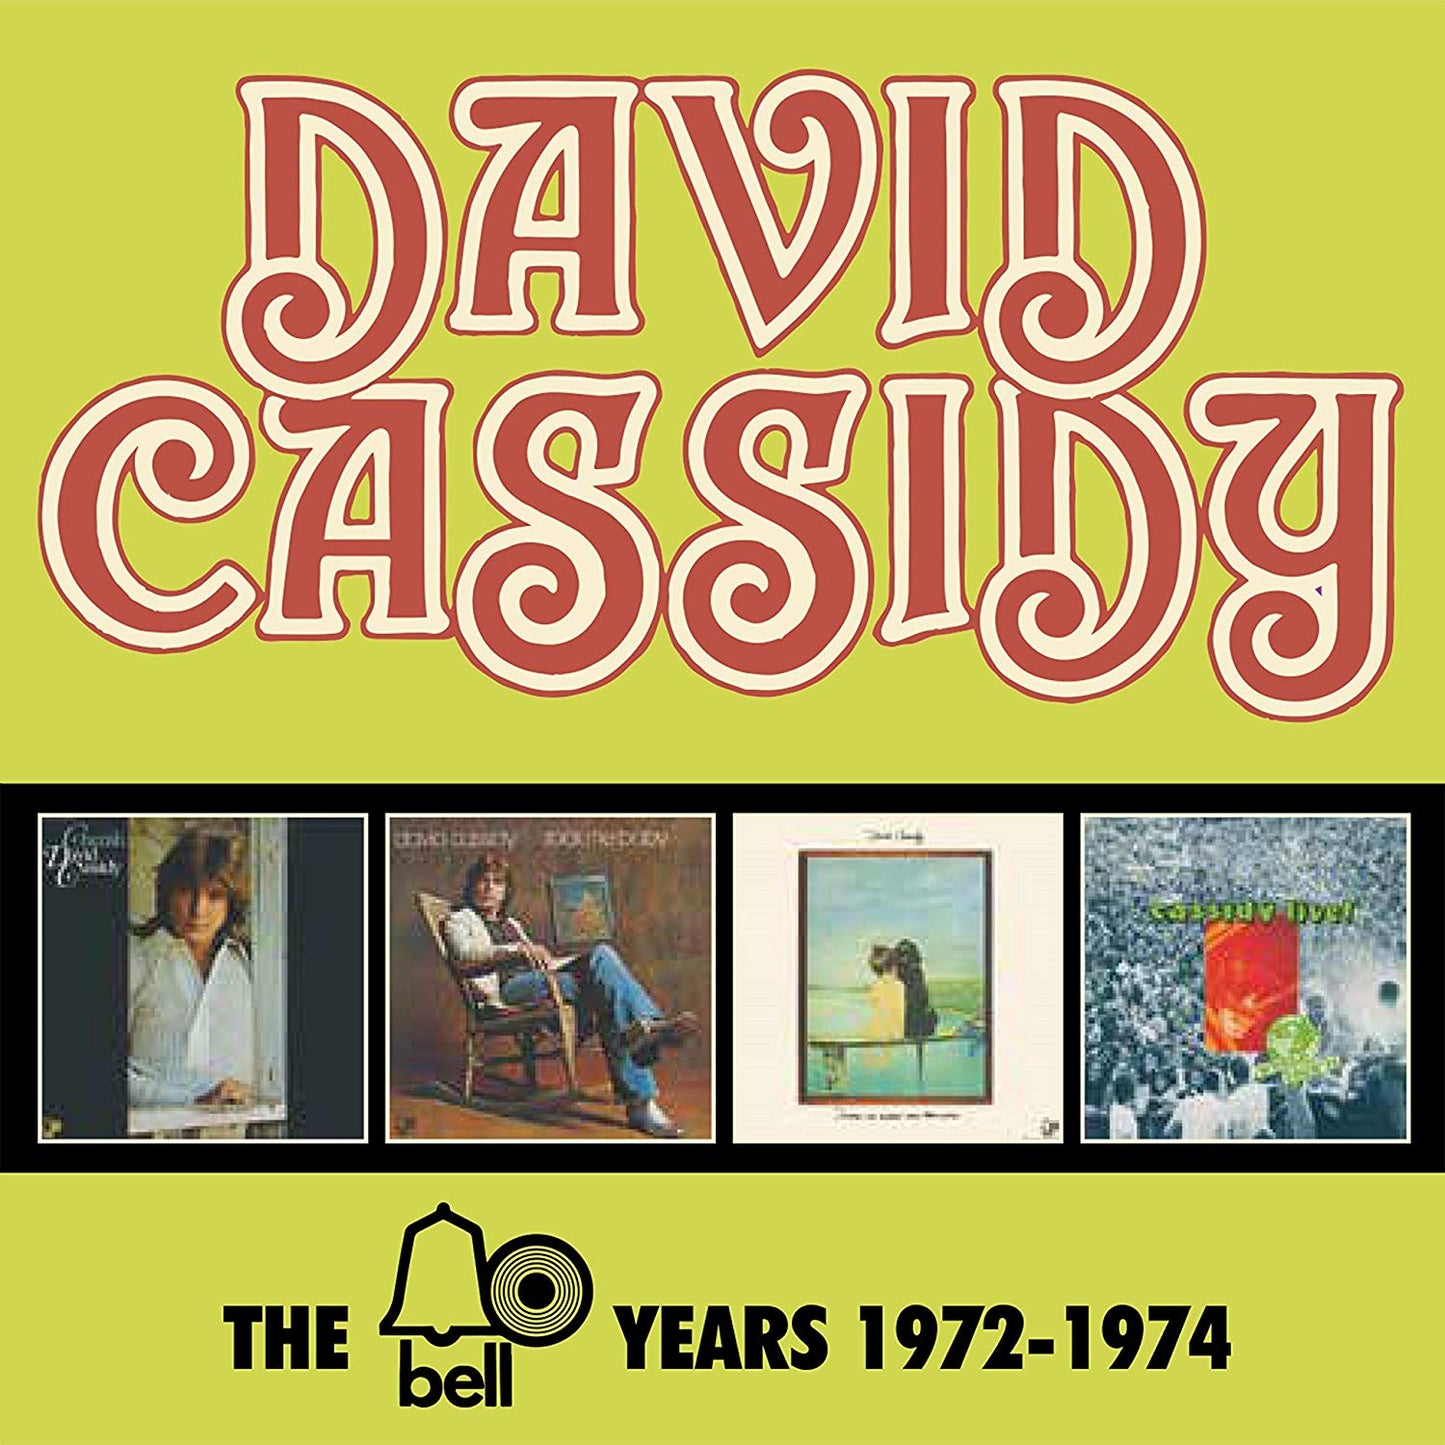 David Cassidy - The Bell Years 1972-1974 - 4CD